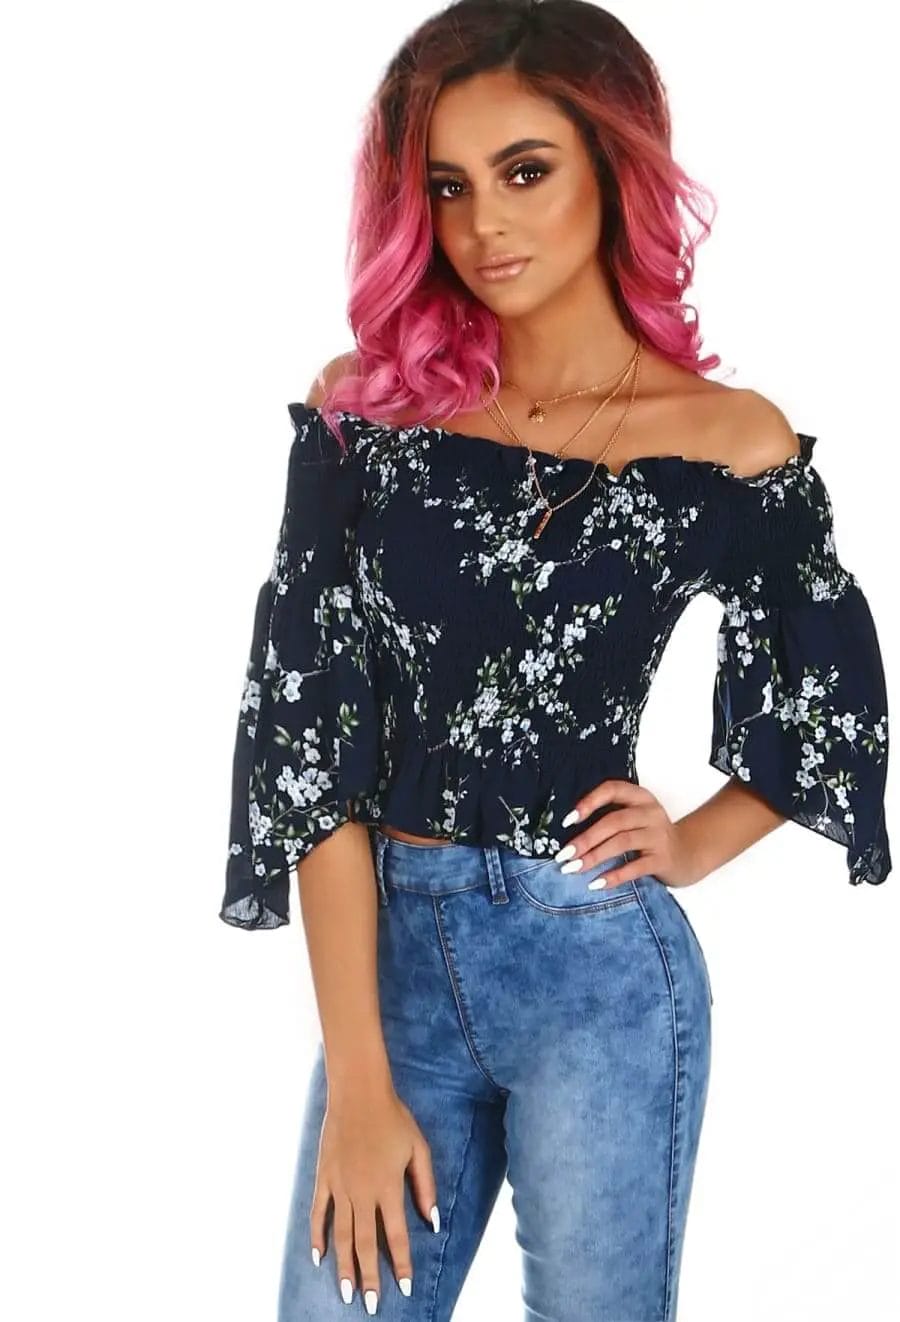 We have got them in flowery prints, the all-time favorite and classy black, straps, no straps, sexy and casual alike, so you will probably find some womens bardot top pictures that will have you picturing how they would look like on you!